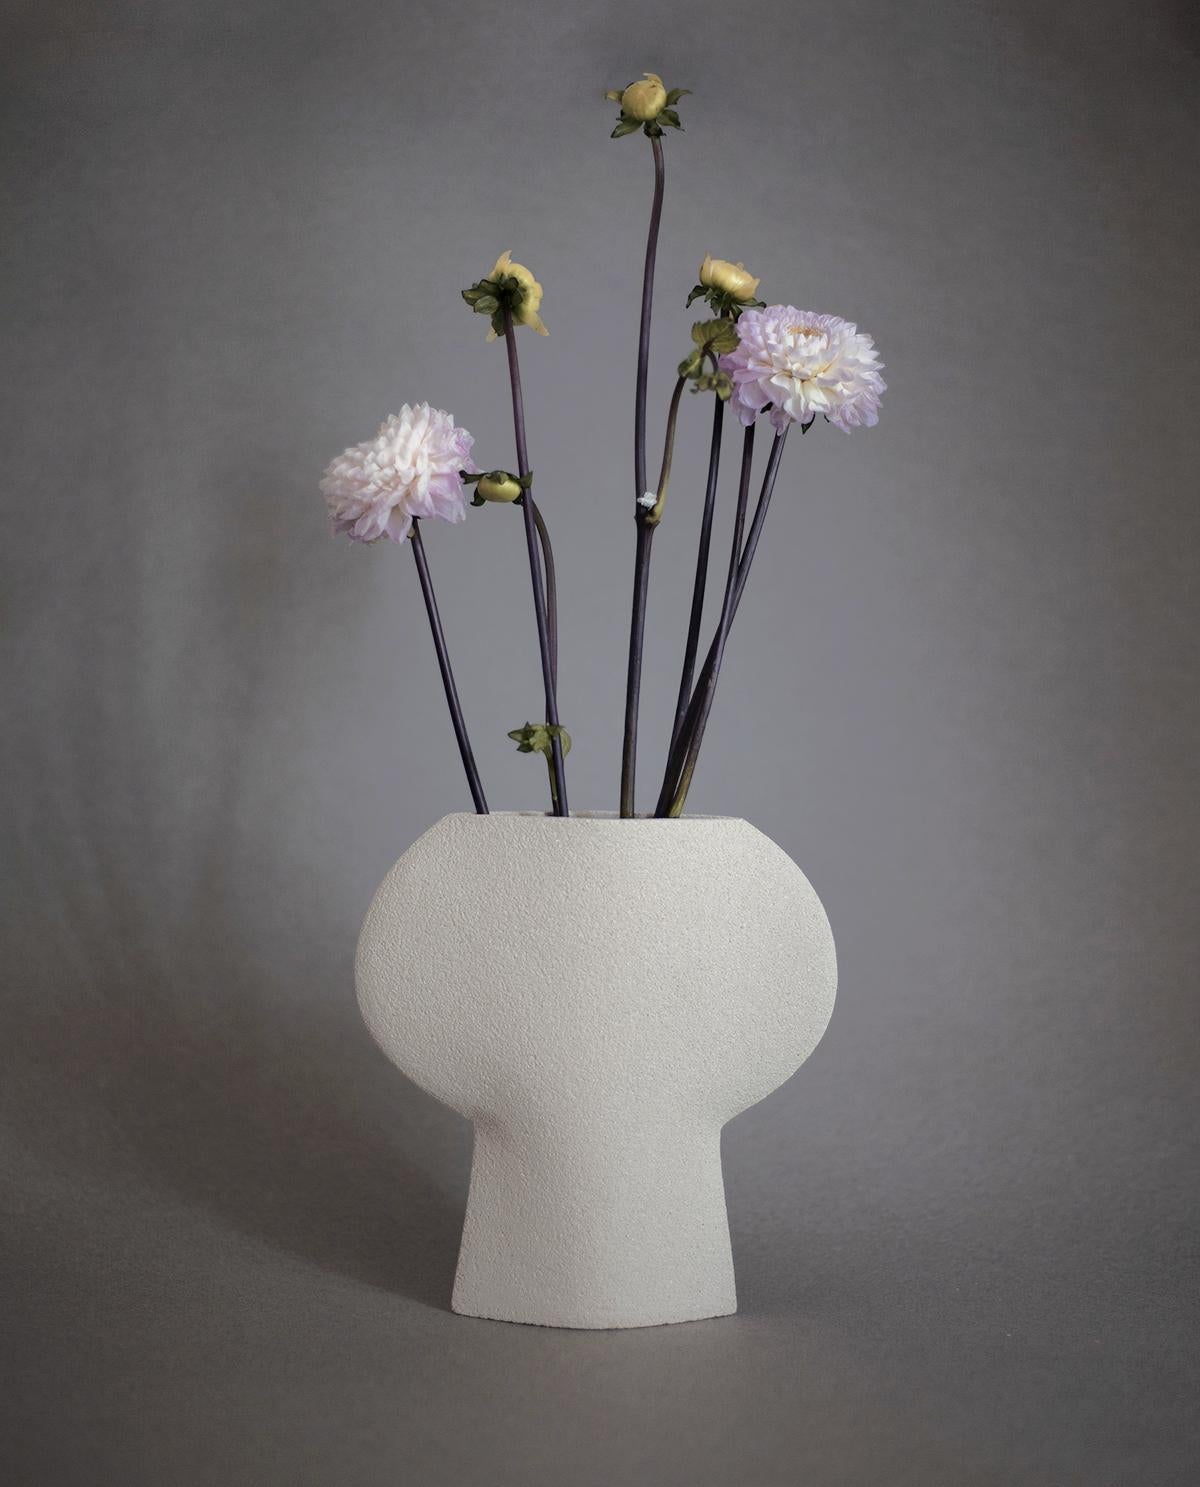 European 21st Century Clover Vase in White Ceramic, Hand-Crafted in France